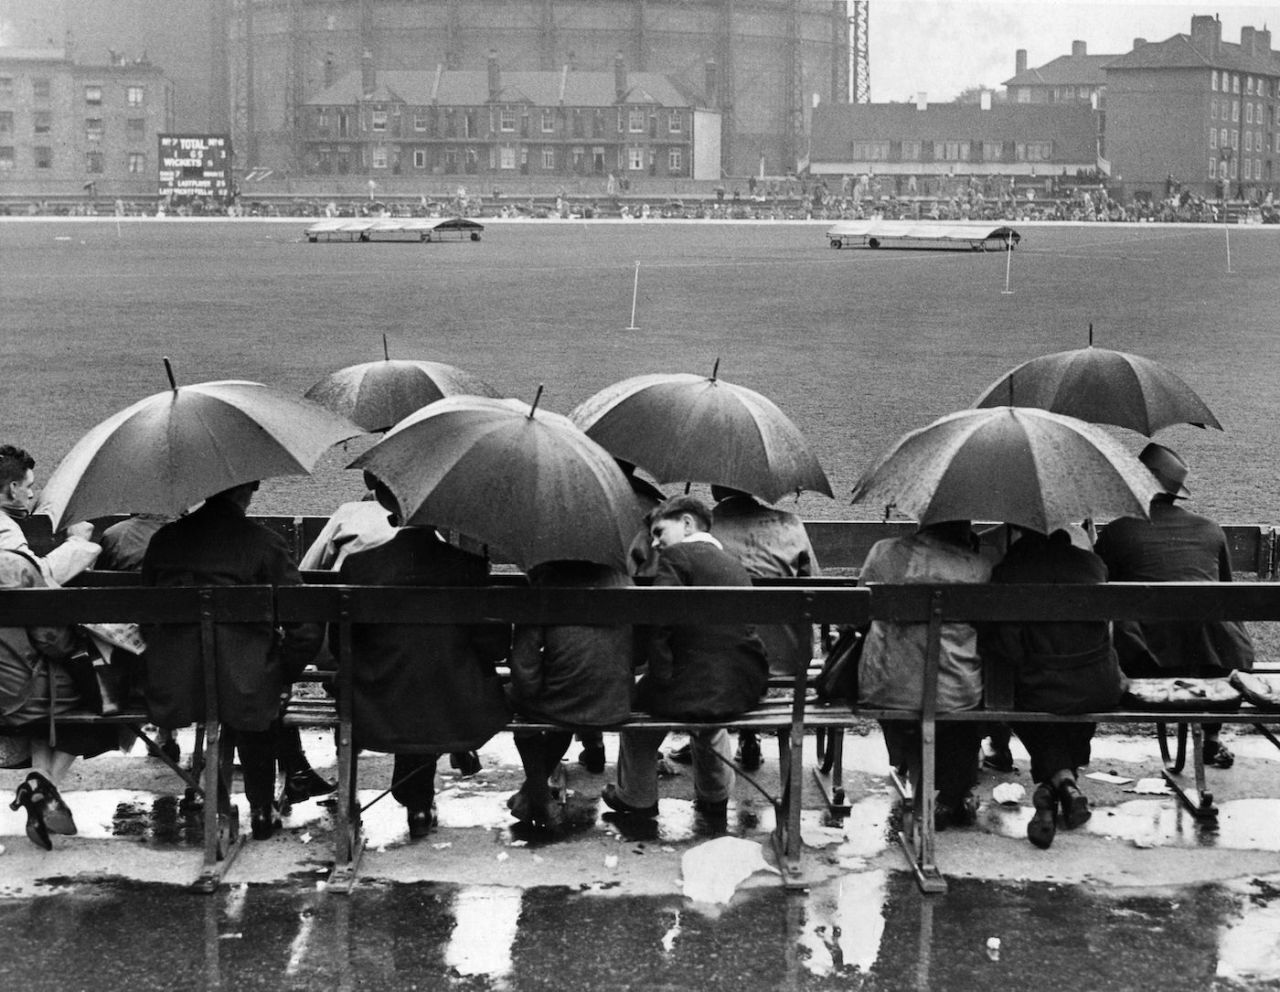 A group of spectators sit underneath umbrellas in the rain, waiting for a match to resume at the Oval, 1946